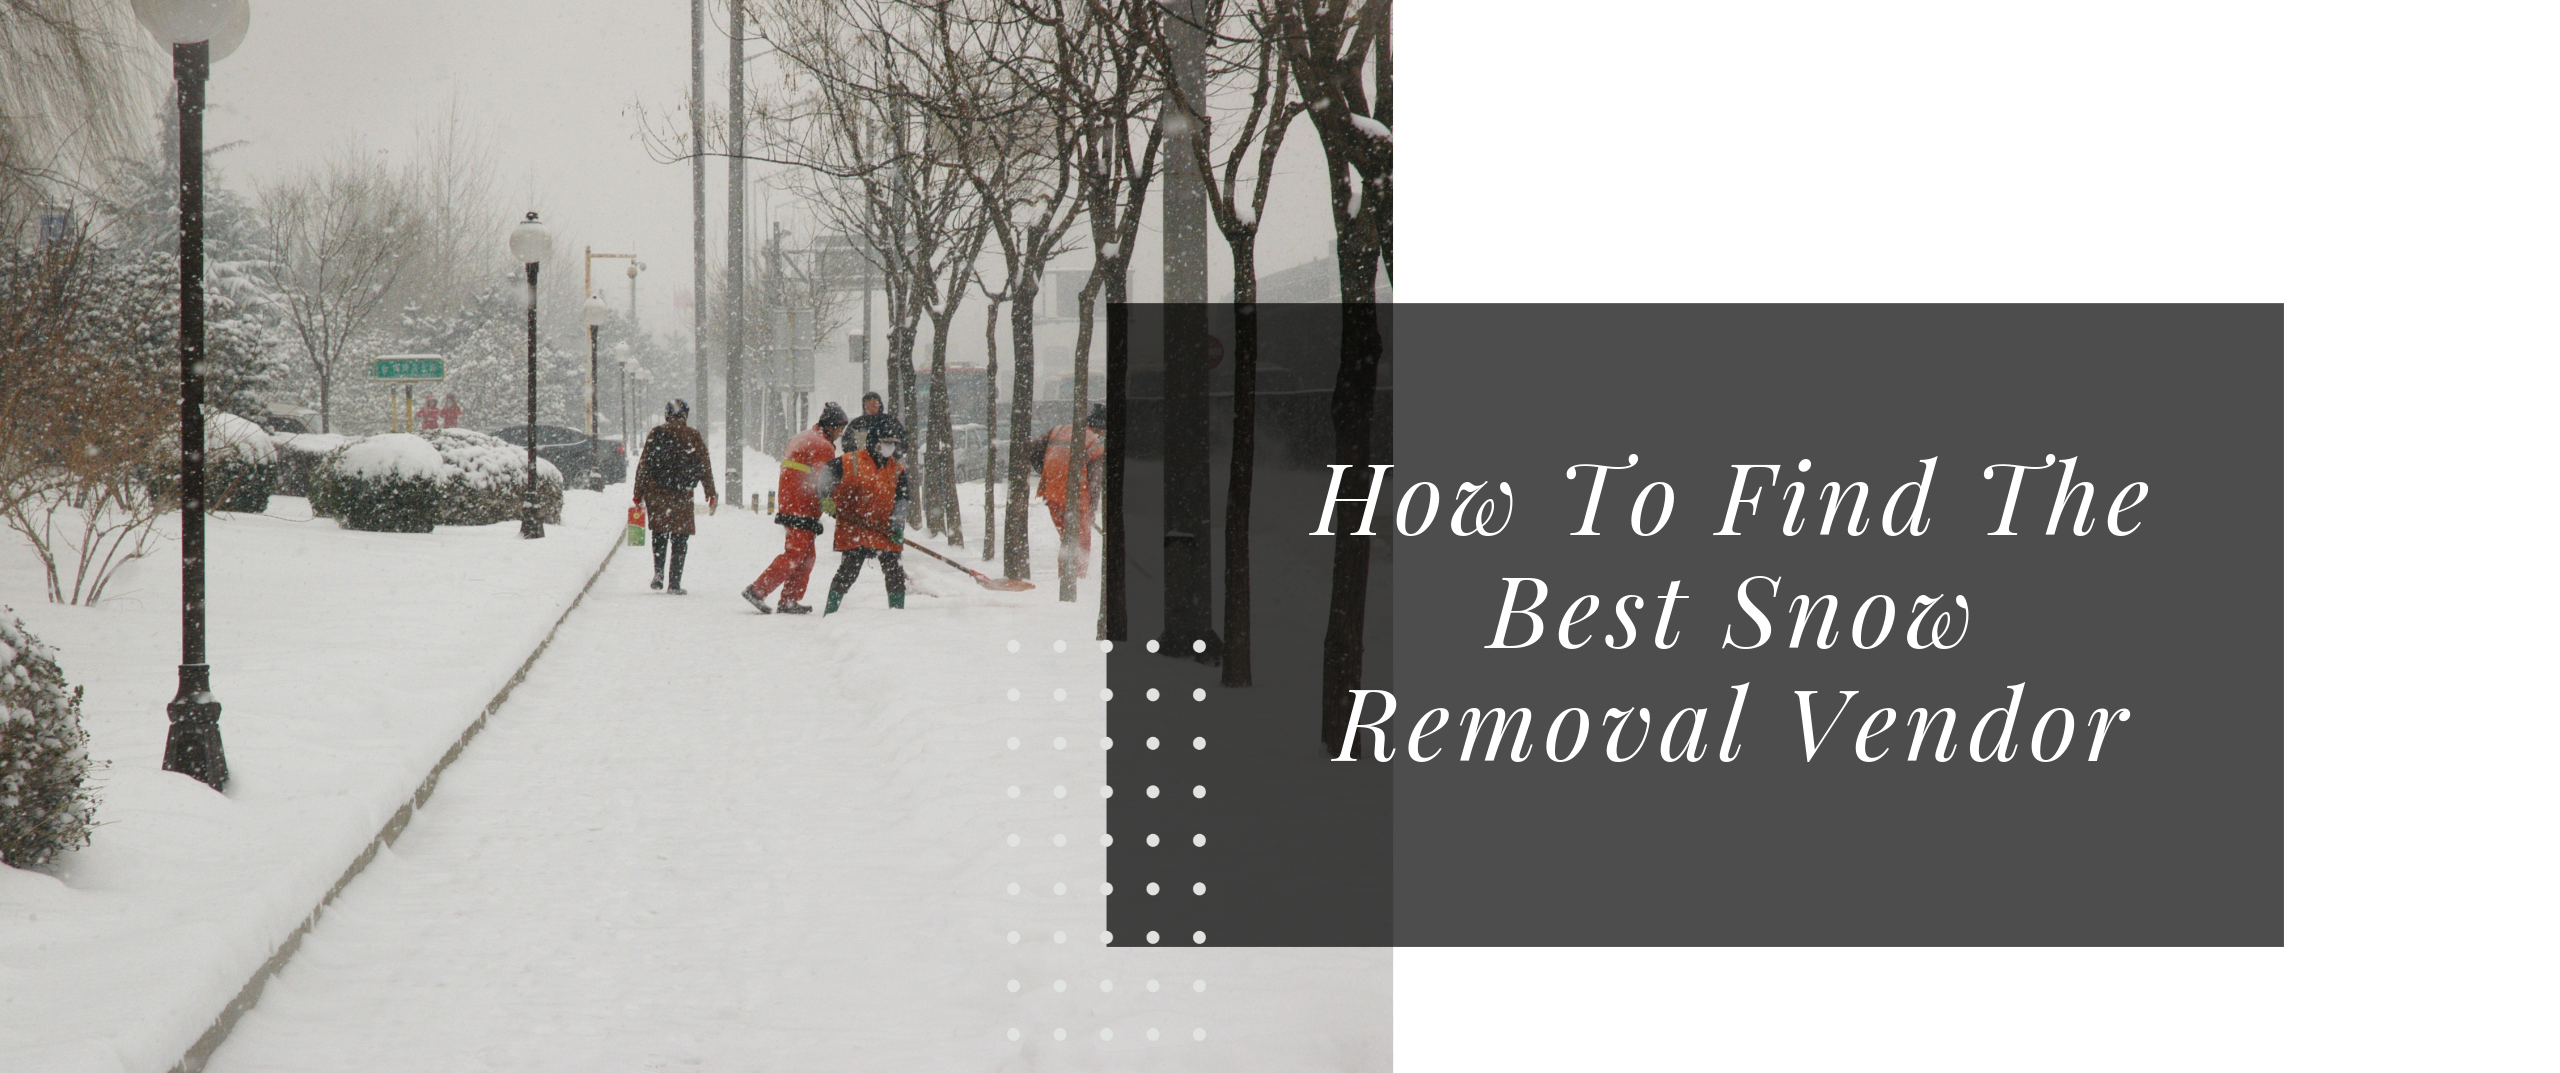 What To Expect When Searching For Snow Removal Services